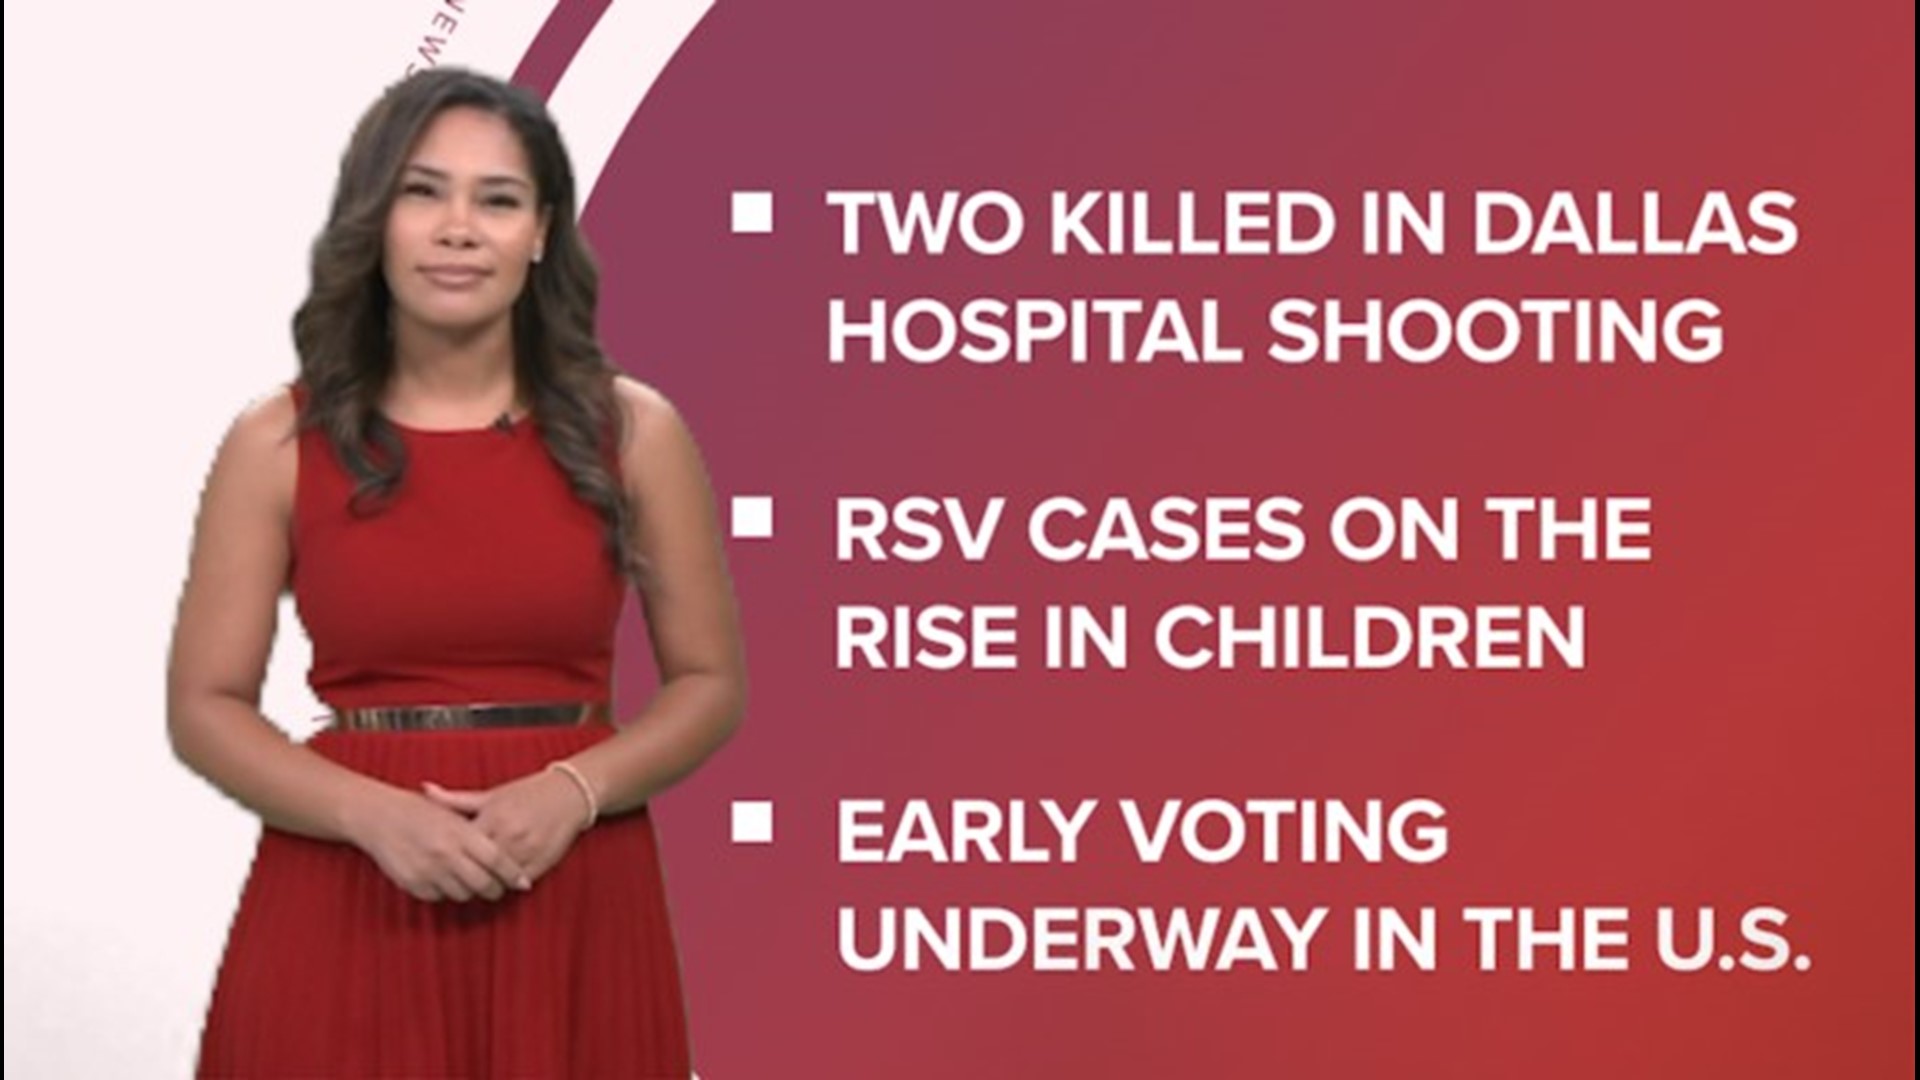 A look at what is happening in the news from a shooting at a Dallas hospital to RSV cases on the rise and early voting underway in the U.S.